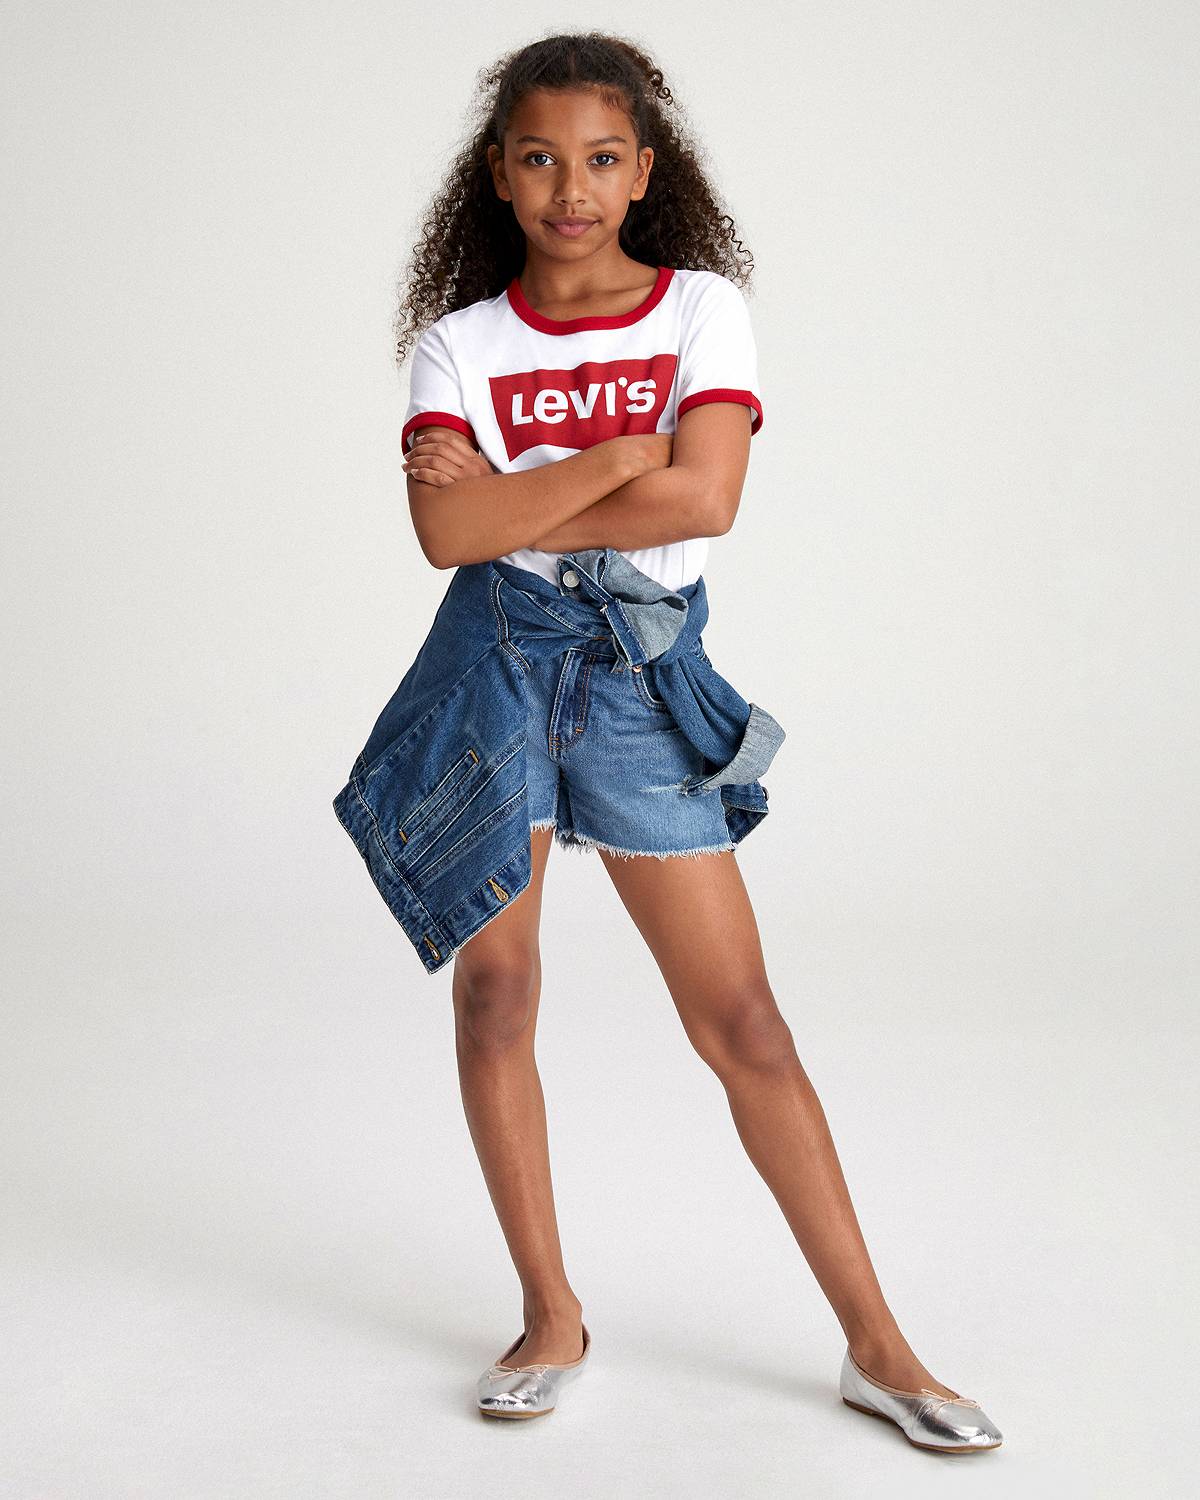 Big girl model wearing shorts and a tee.